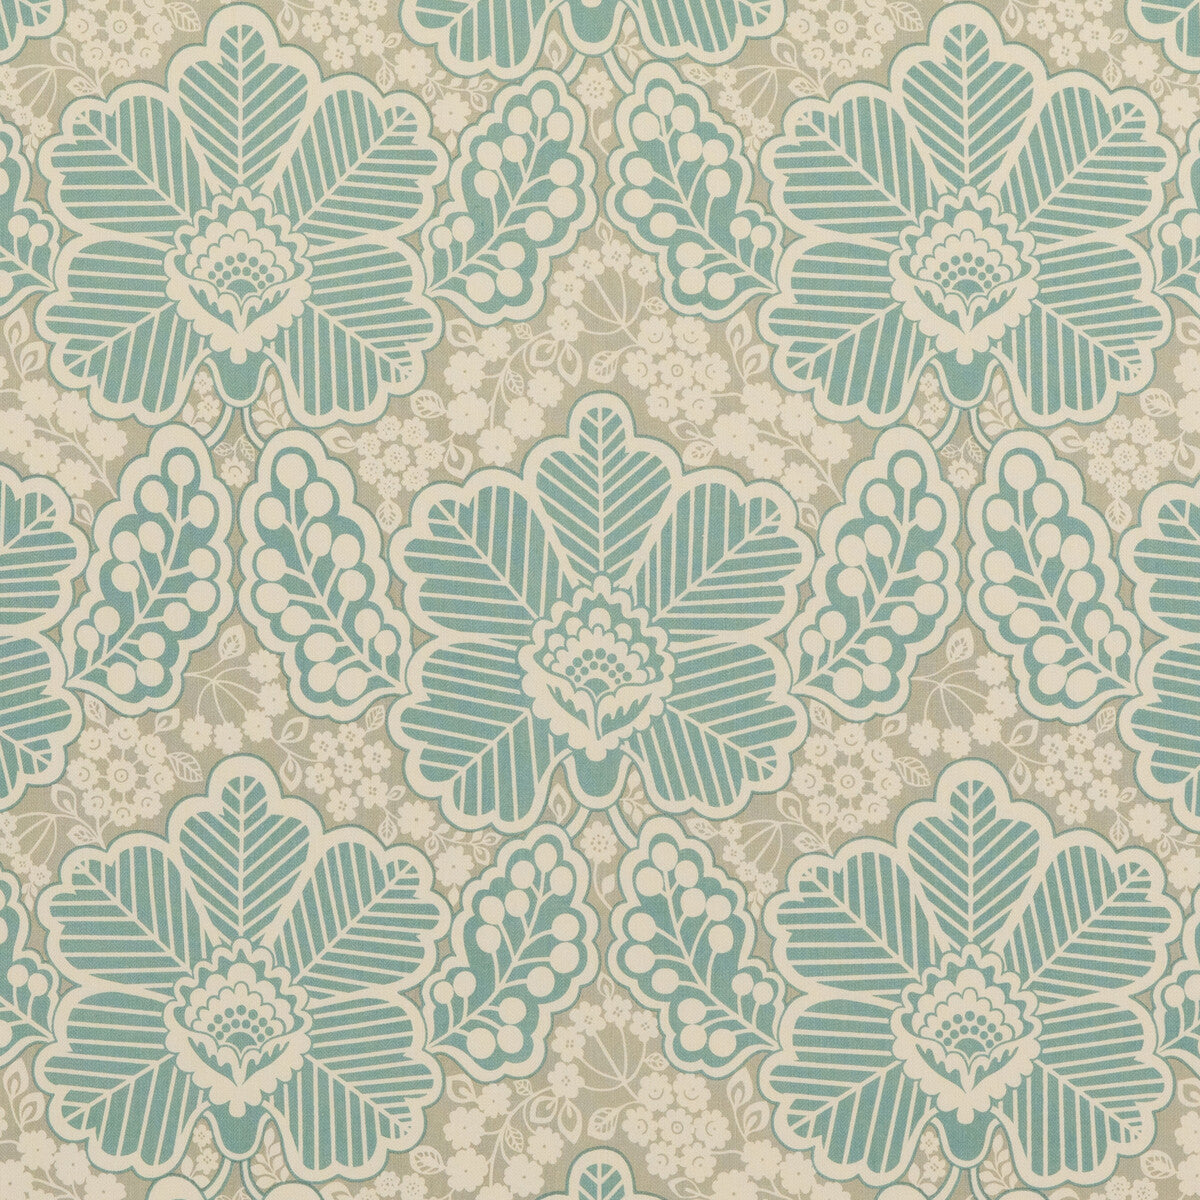 Arbour fabric in aqua color - pattern PP50479.3.0 - by Baker Lifestyle in the Block Party collection